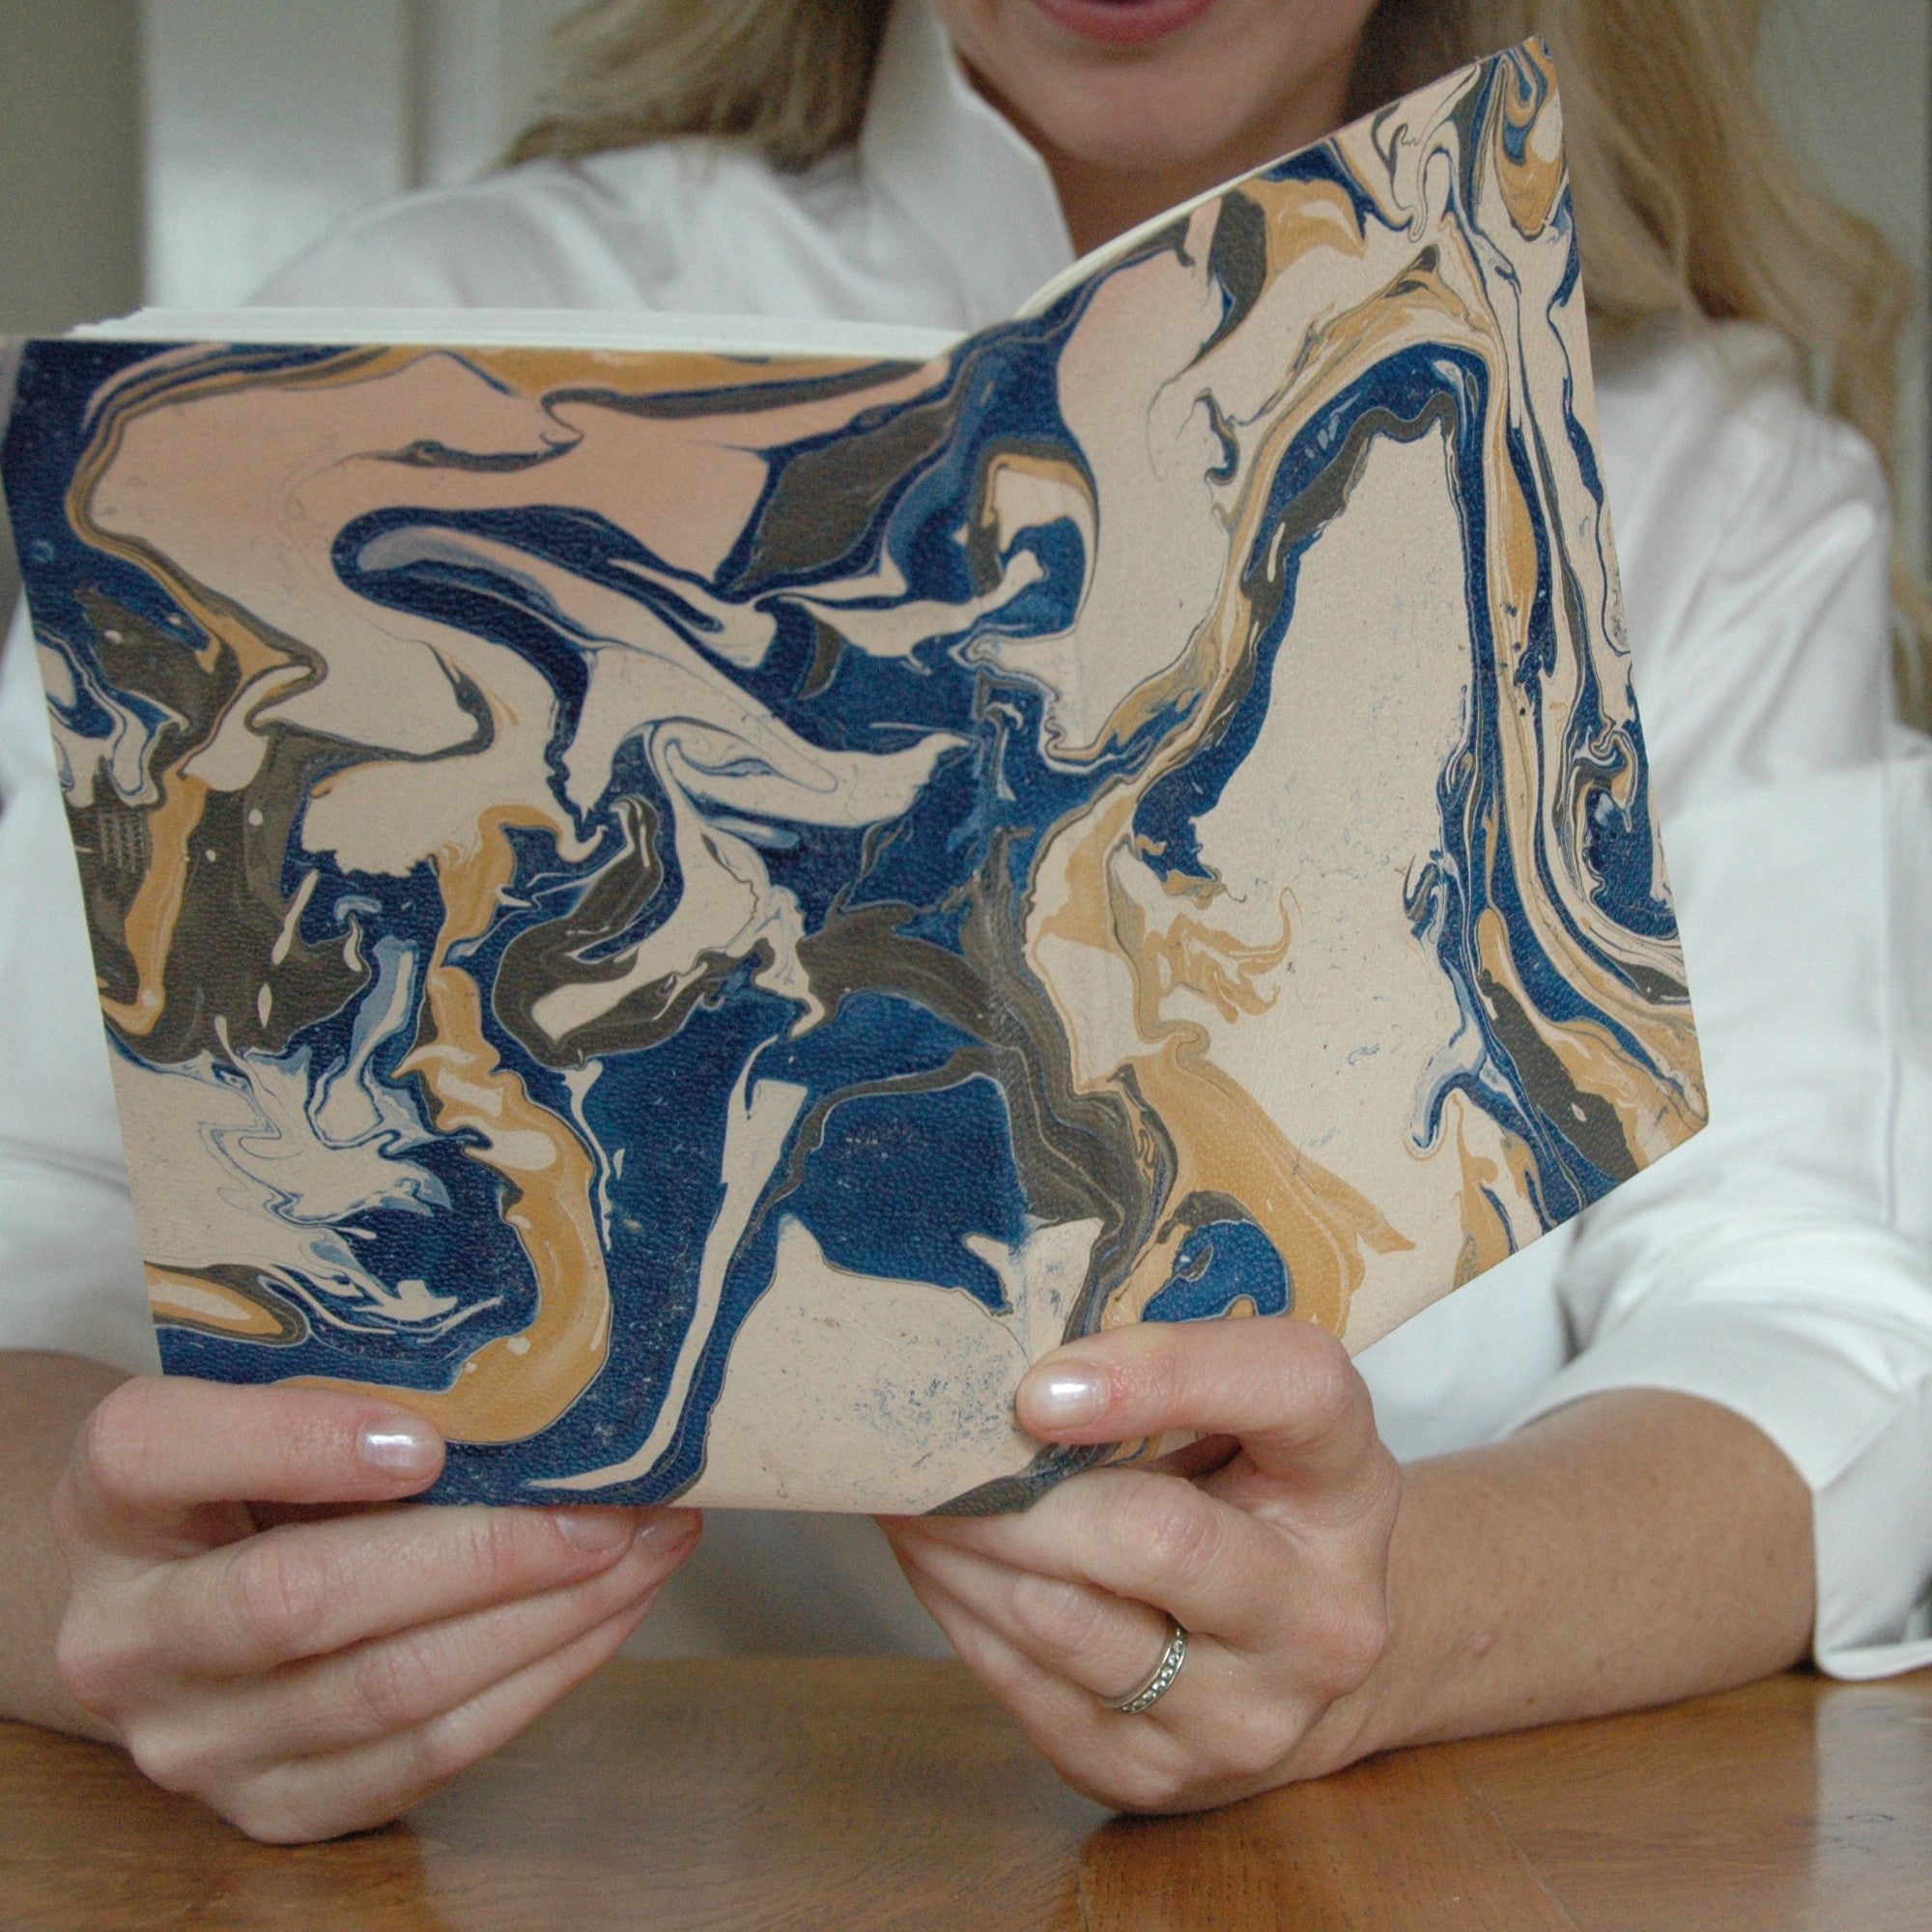 Marbled Leather Journal